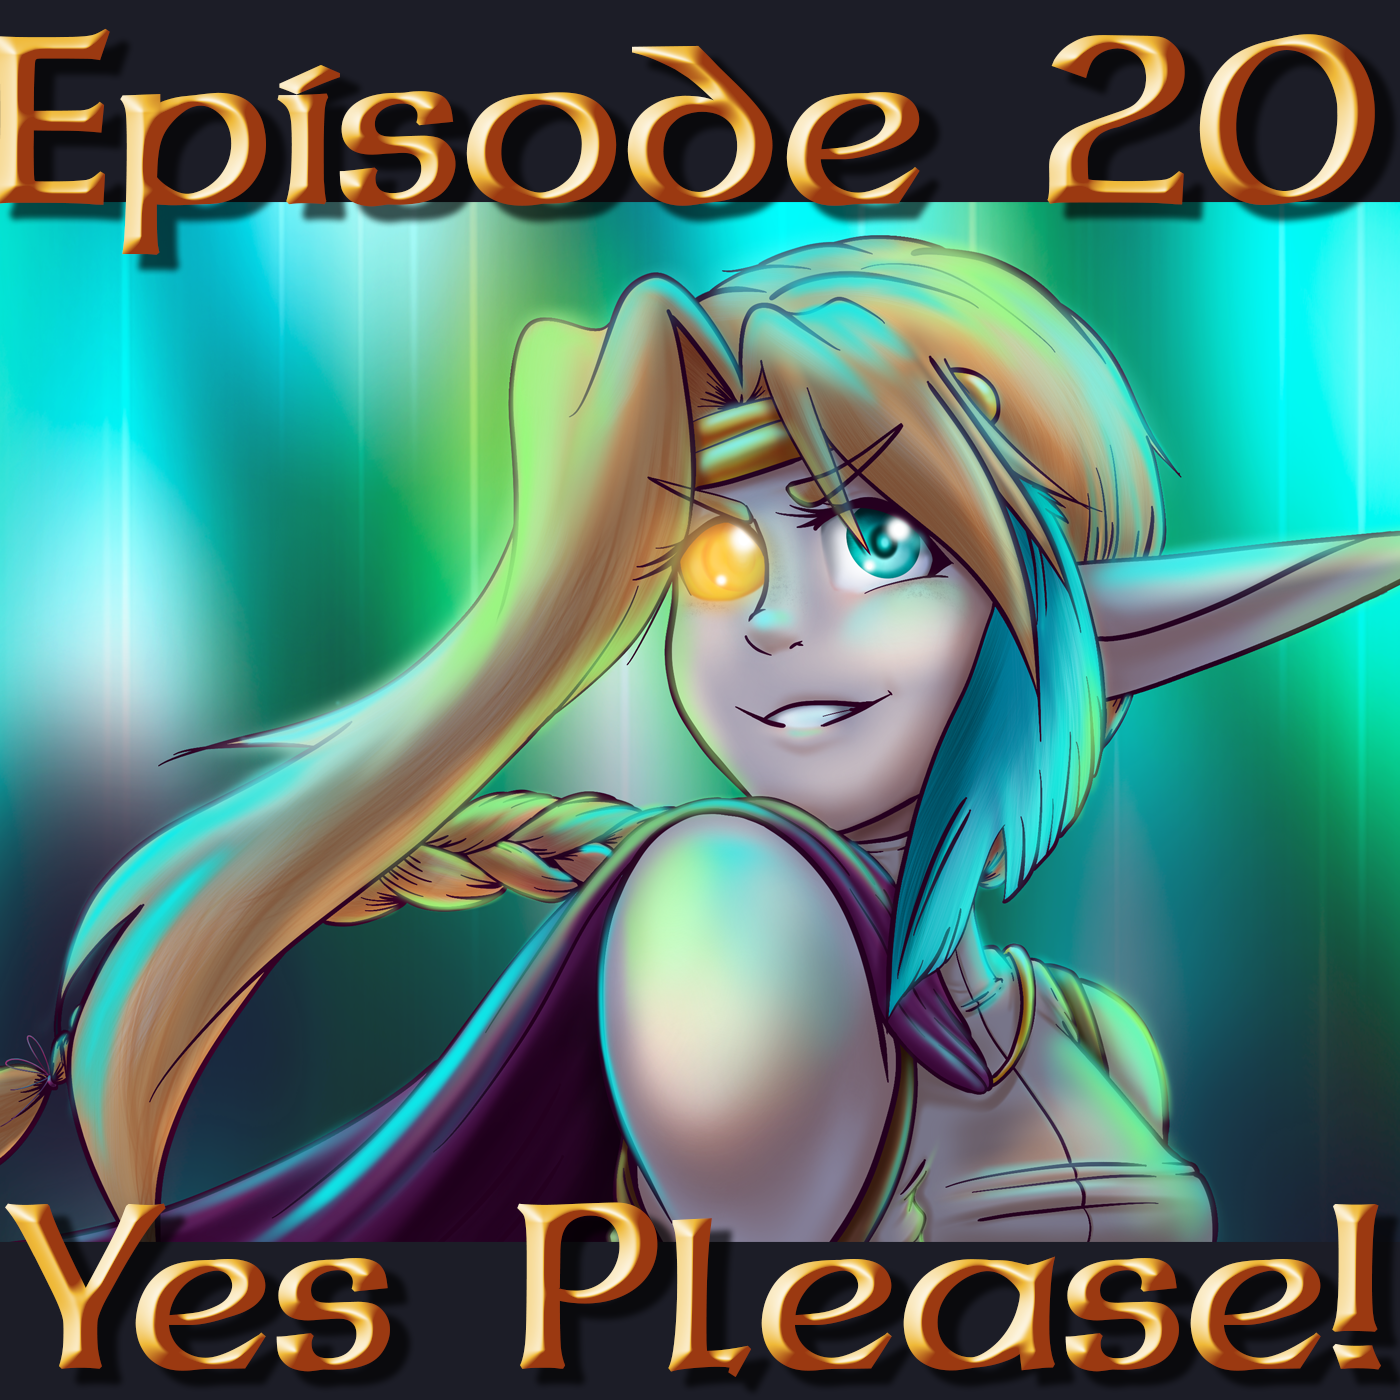 Yes Please! Episode 20: The Call for Help (Check Please S1 E63.5)